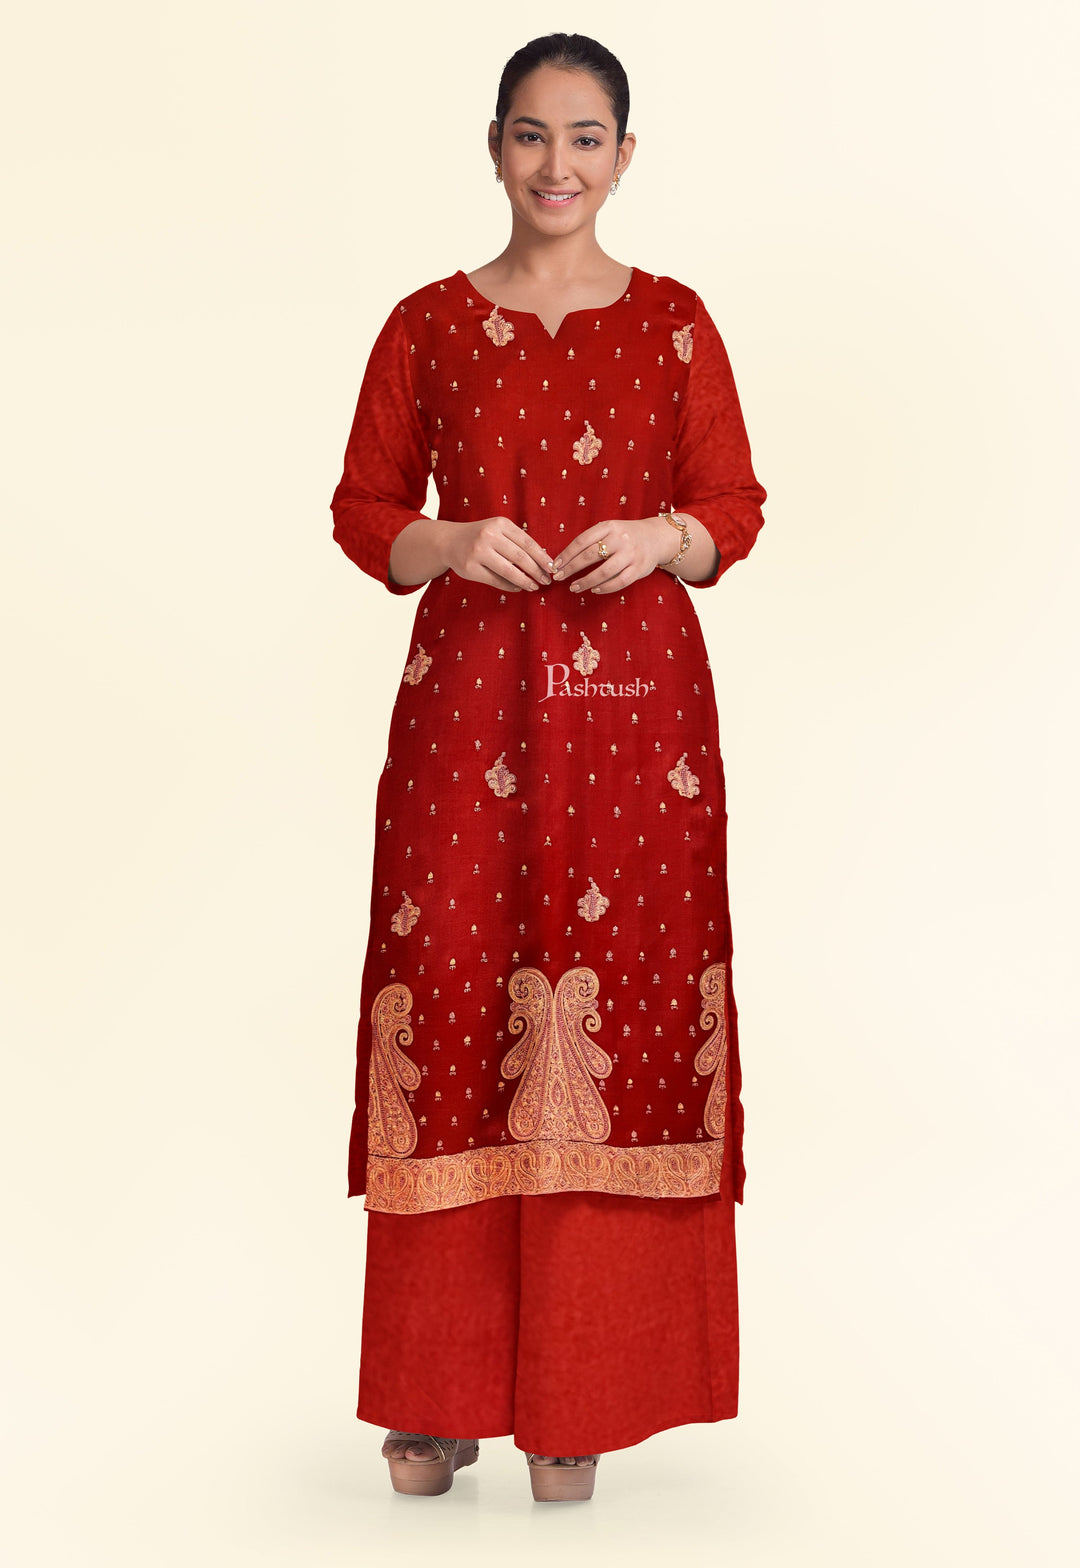 Pashtush India Apparel & Accessories Pashtush Unstitched Kashmiri Embroidery Suit with shawl, Fine Wool, Soft and Warm, Red